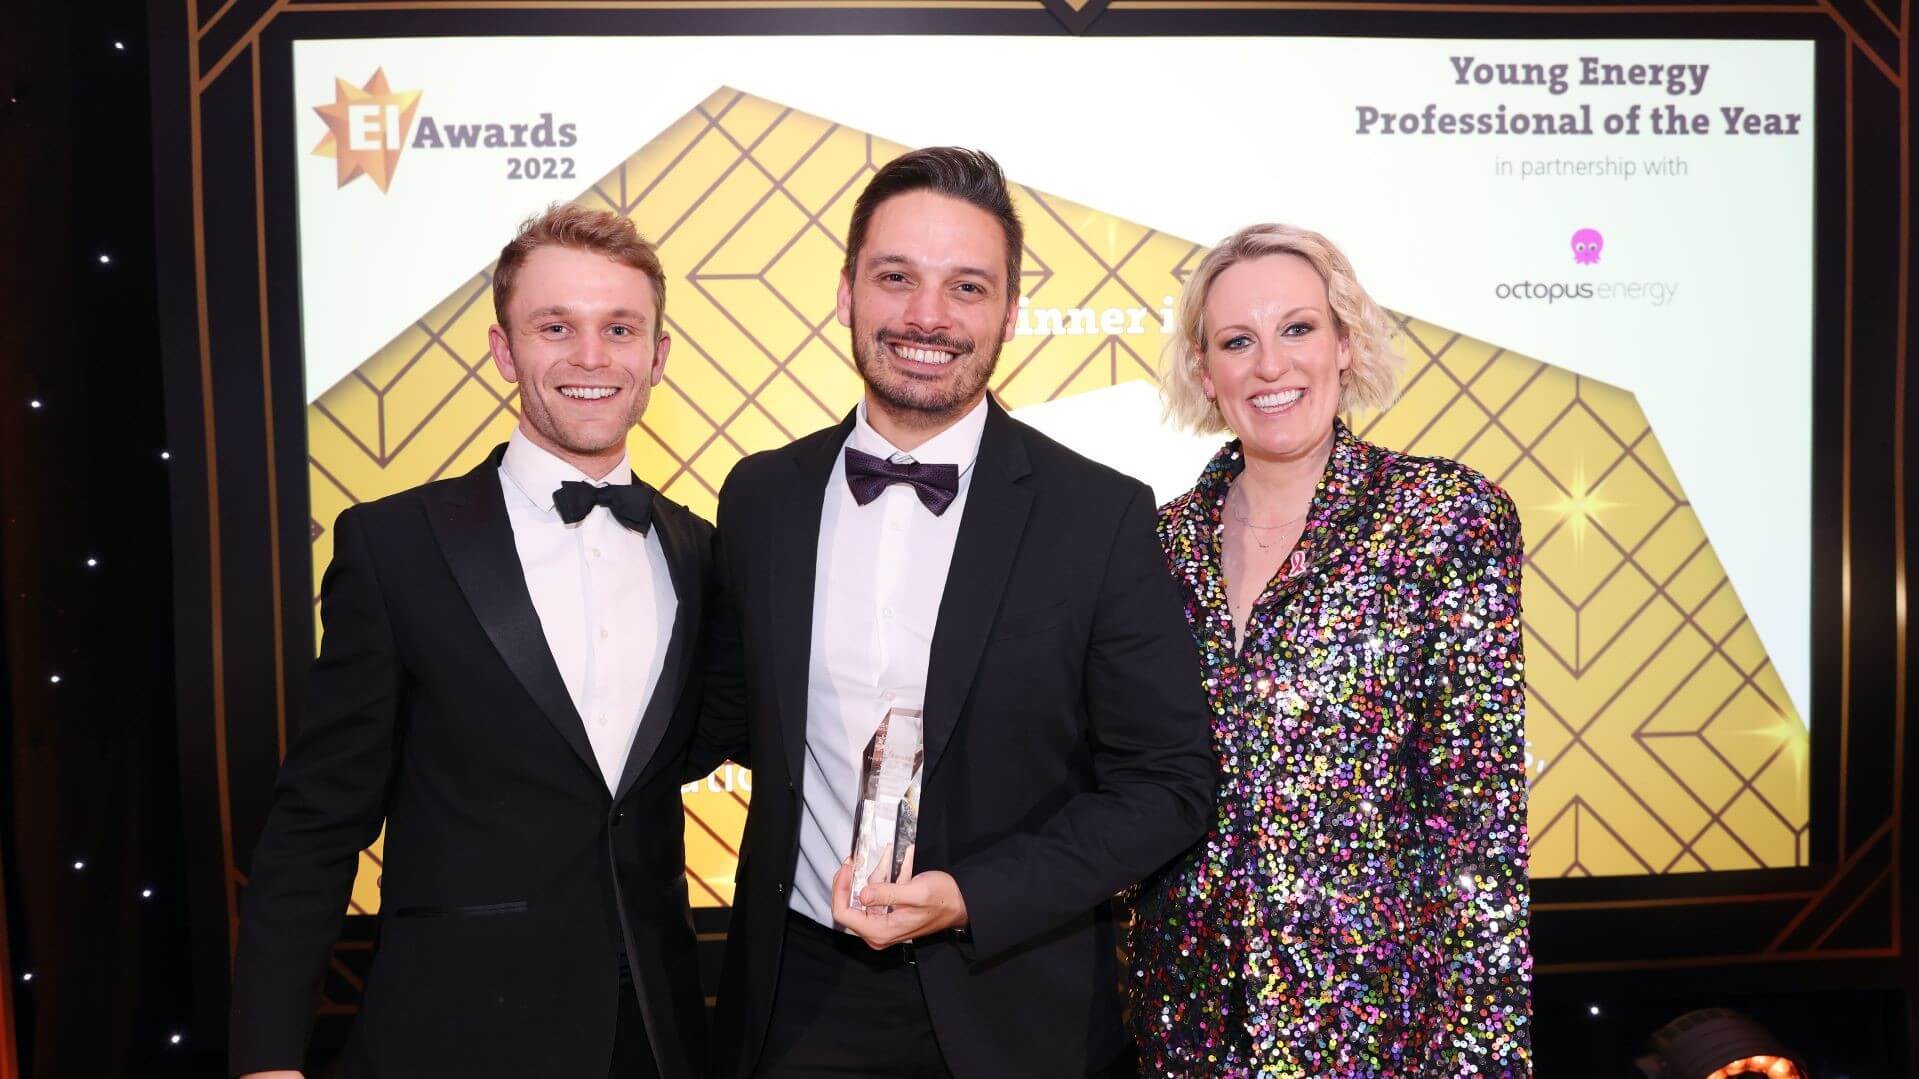 photo of Guilherme Castro and his award with two other people